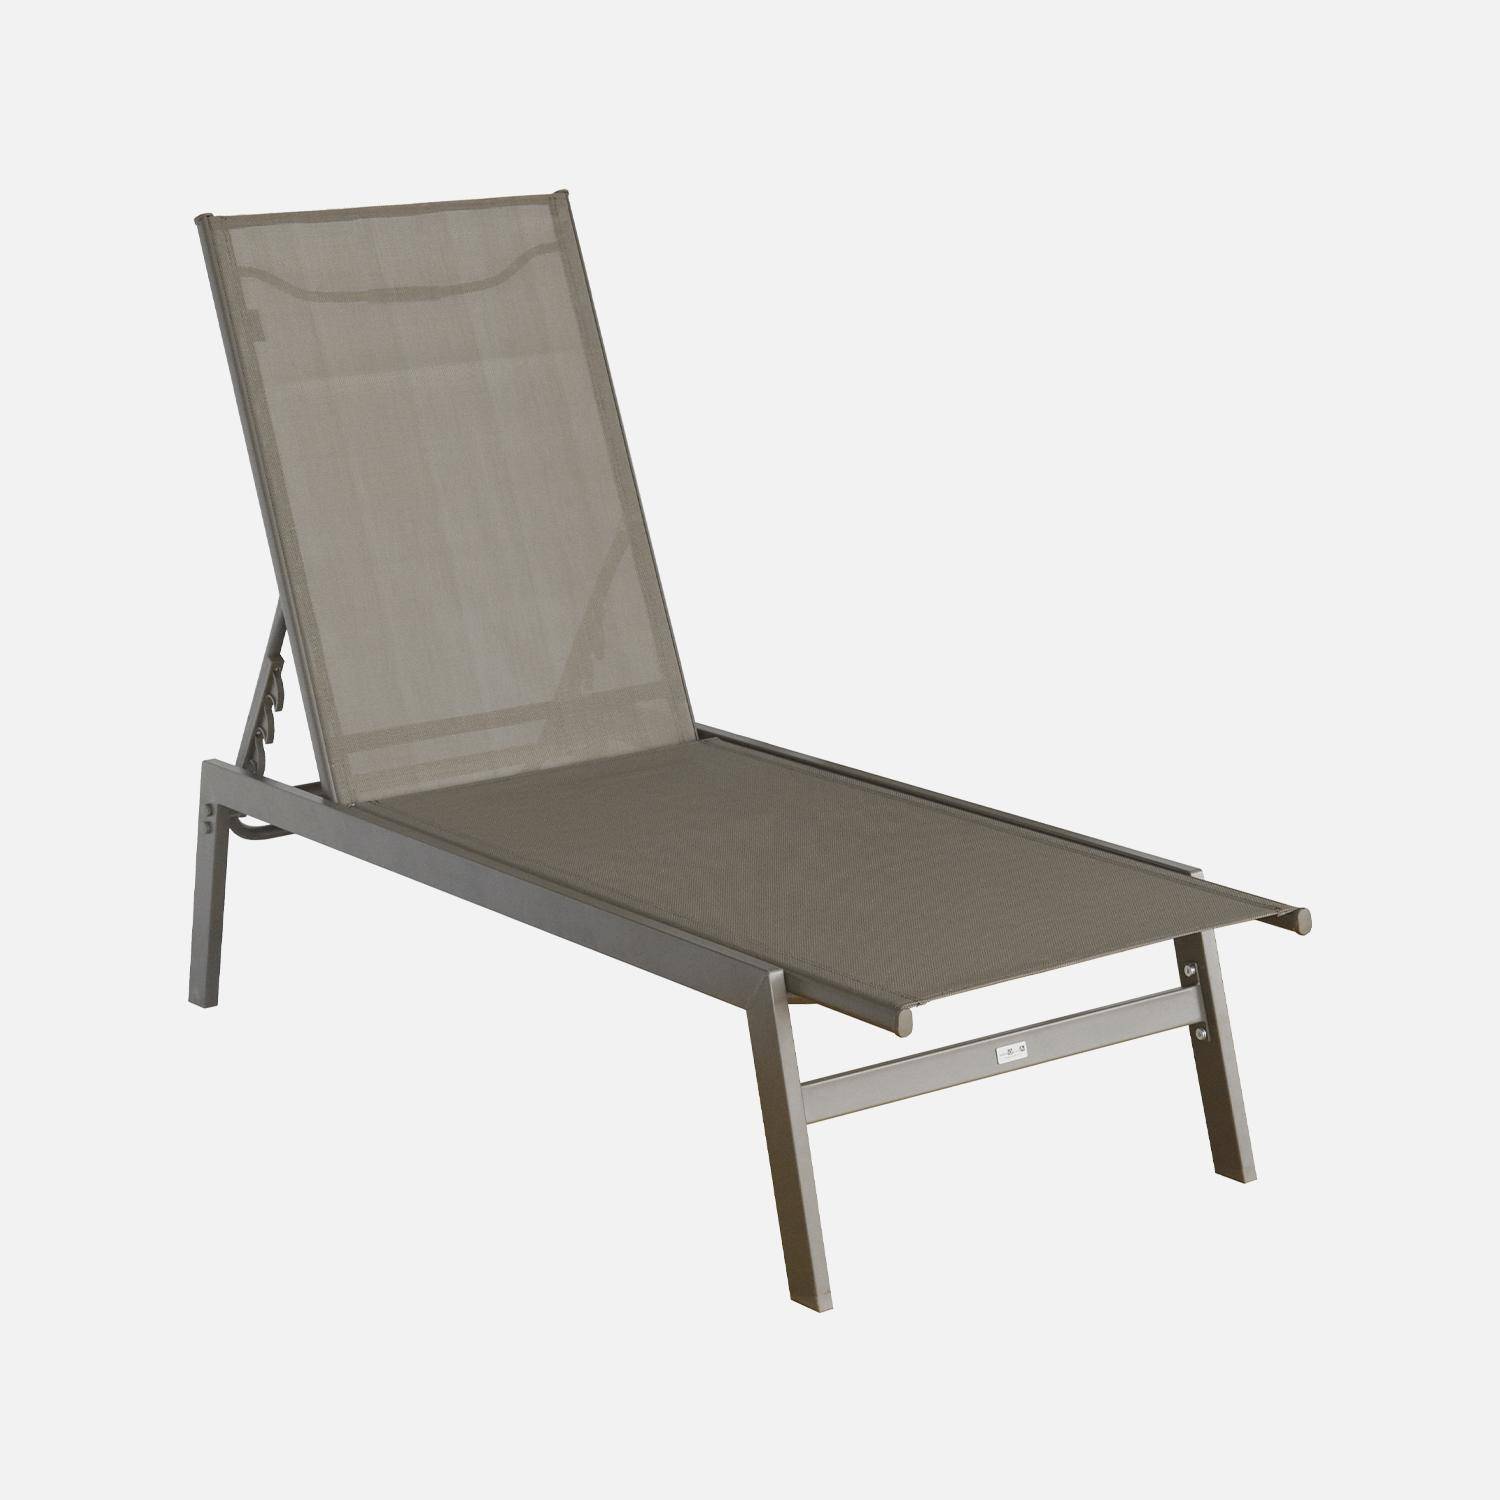 Pair of textilene and metal multi-position loungers, brown Photo4